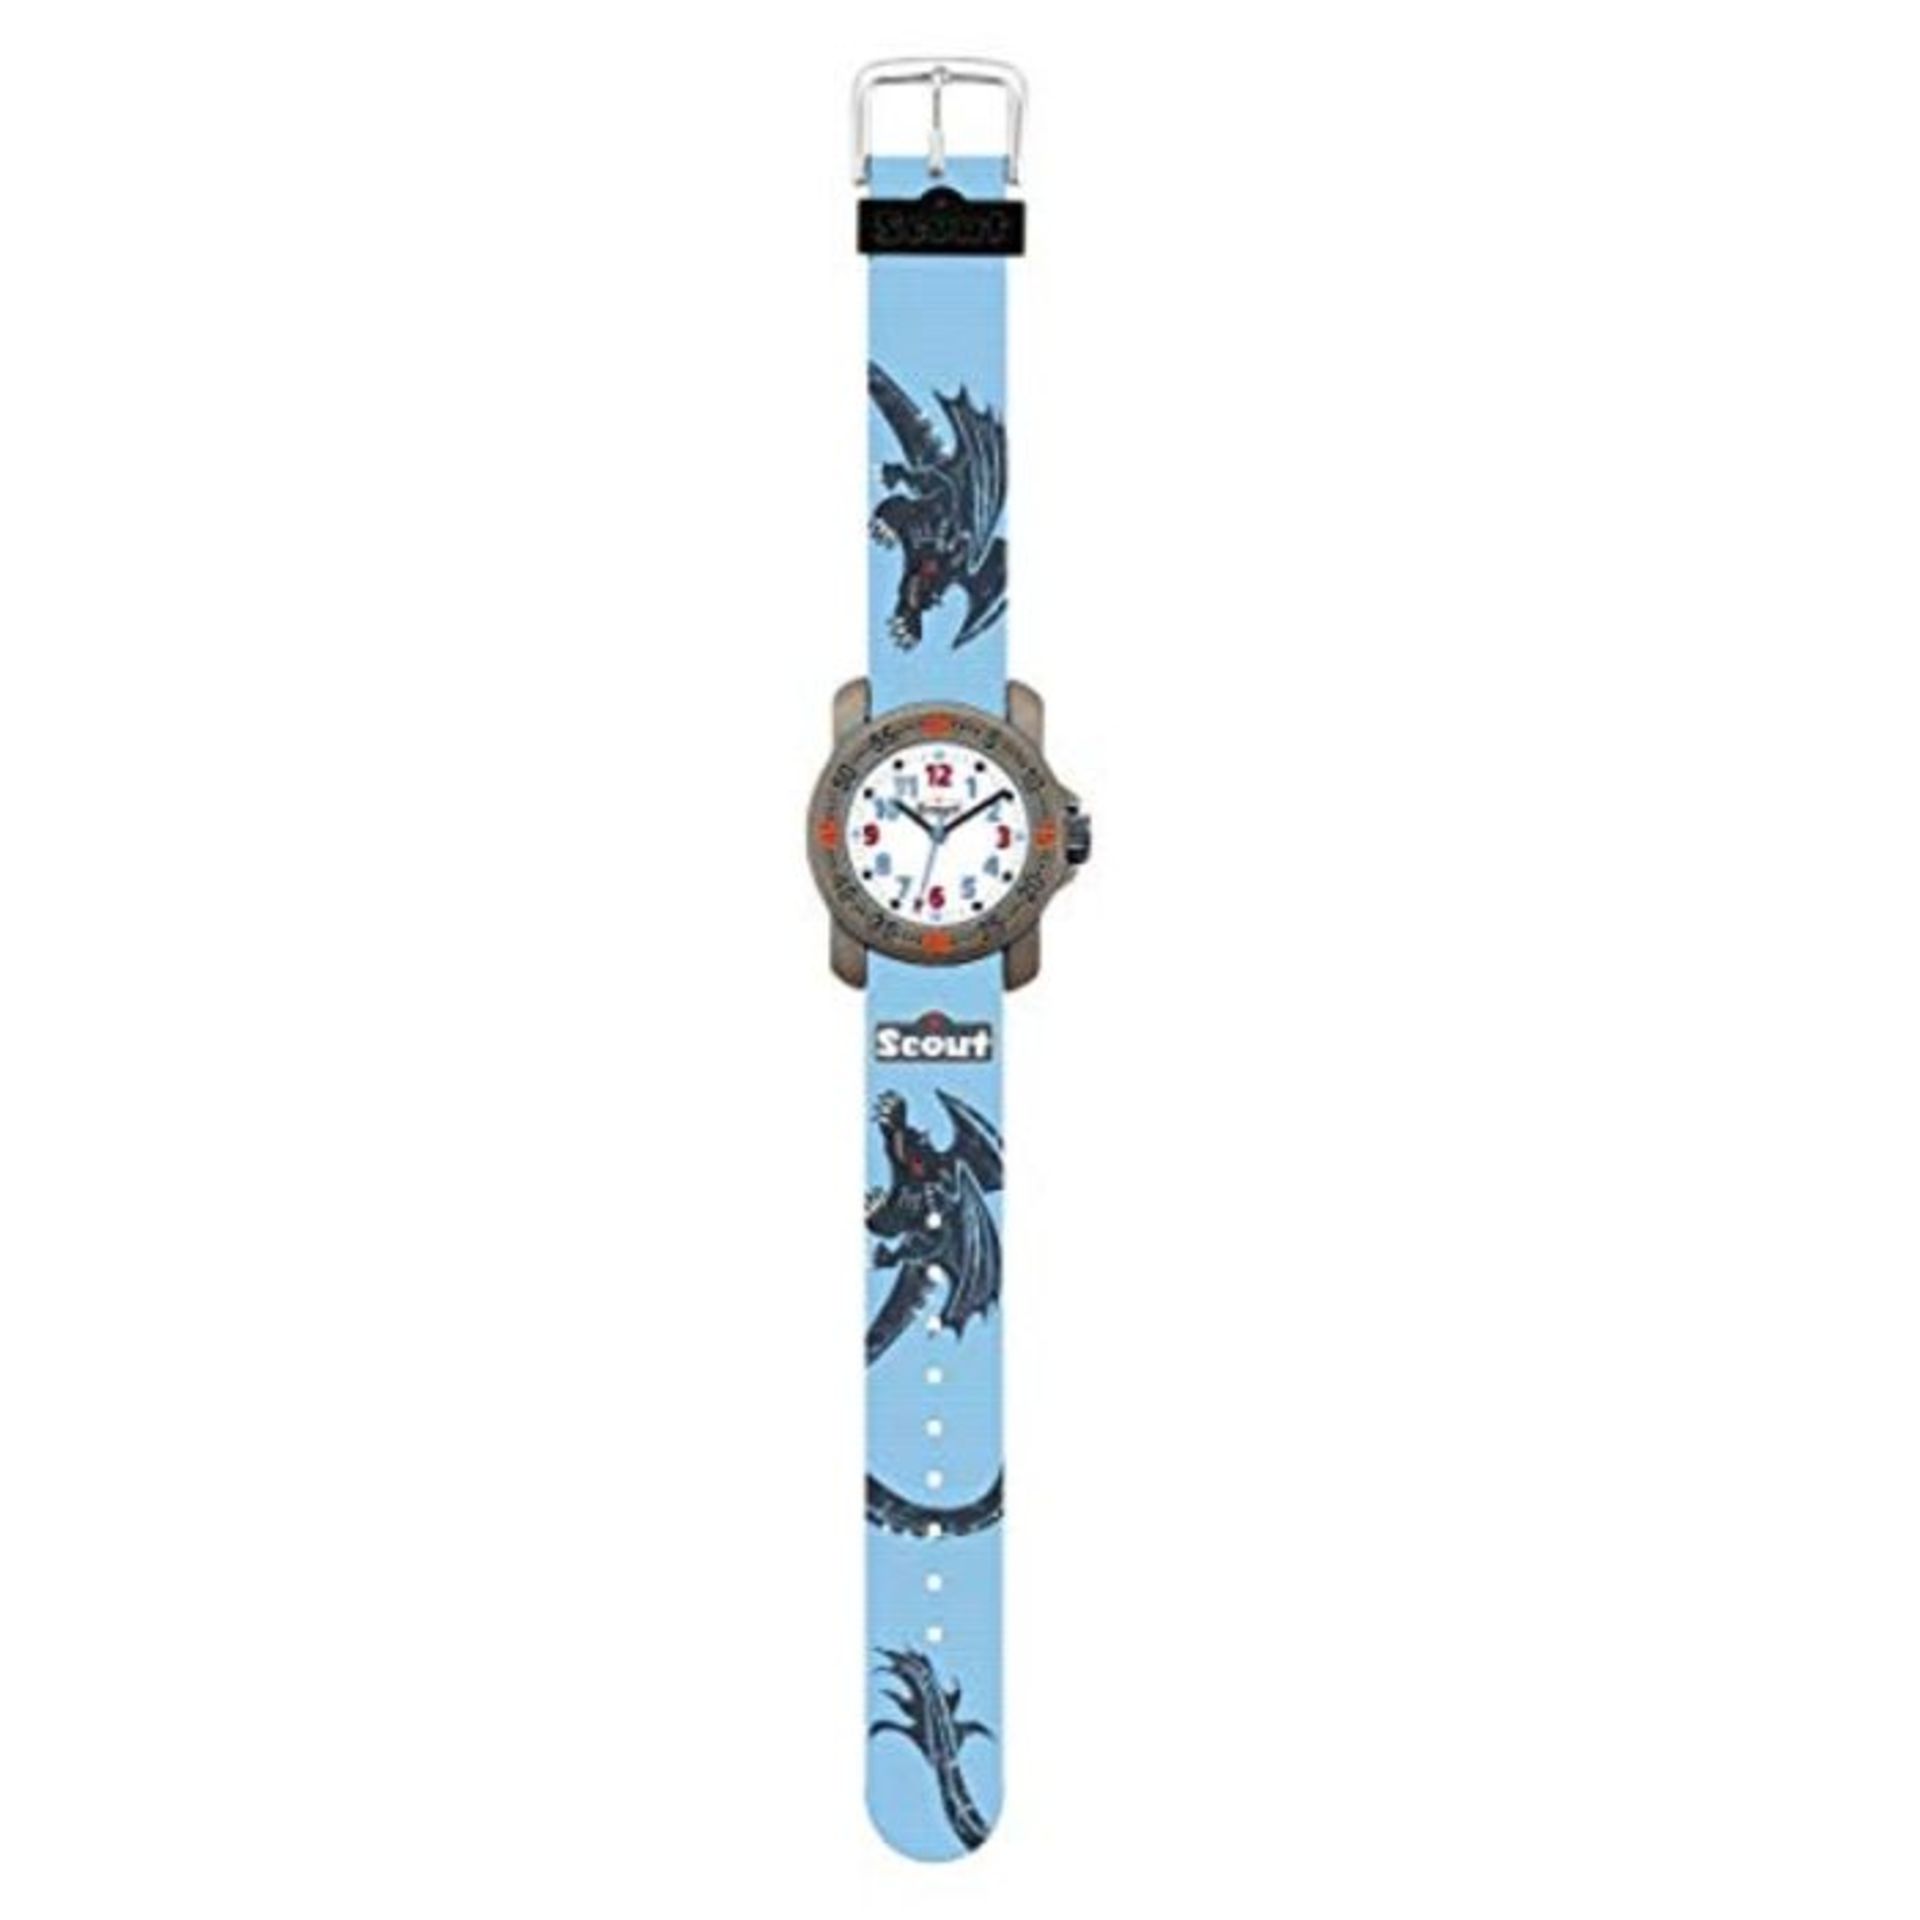 Scout Boy's Analogue Quartz Watch with Fabric Band Strap 1 - Image 3 of 5